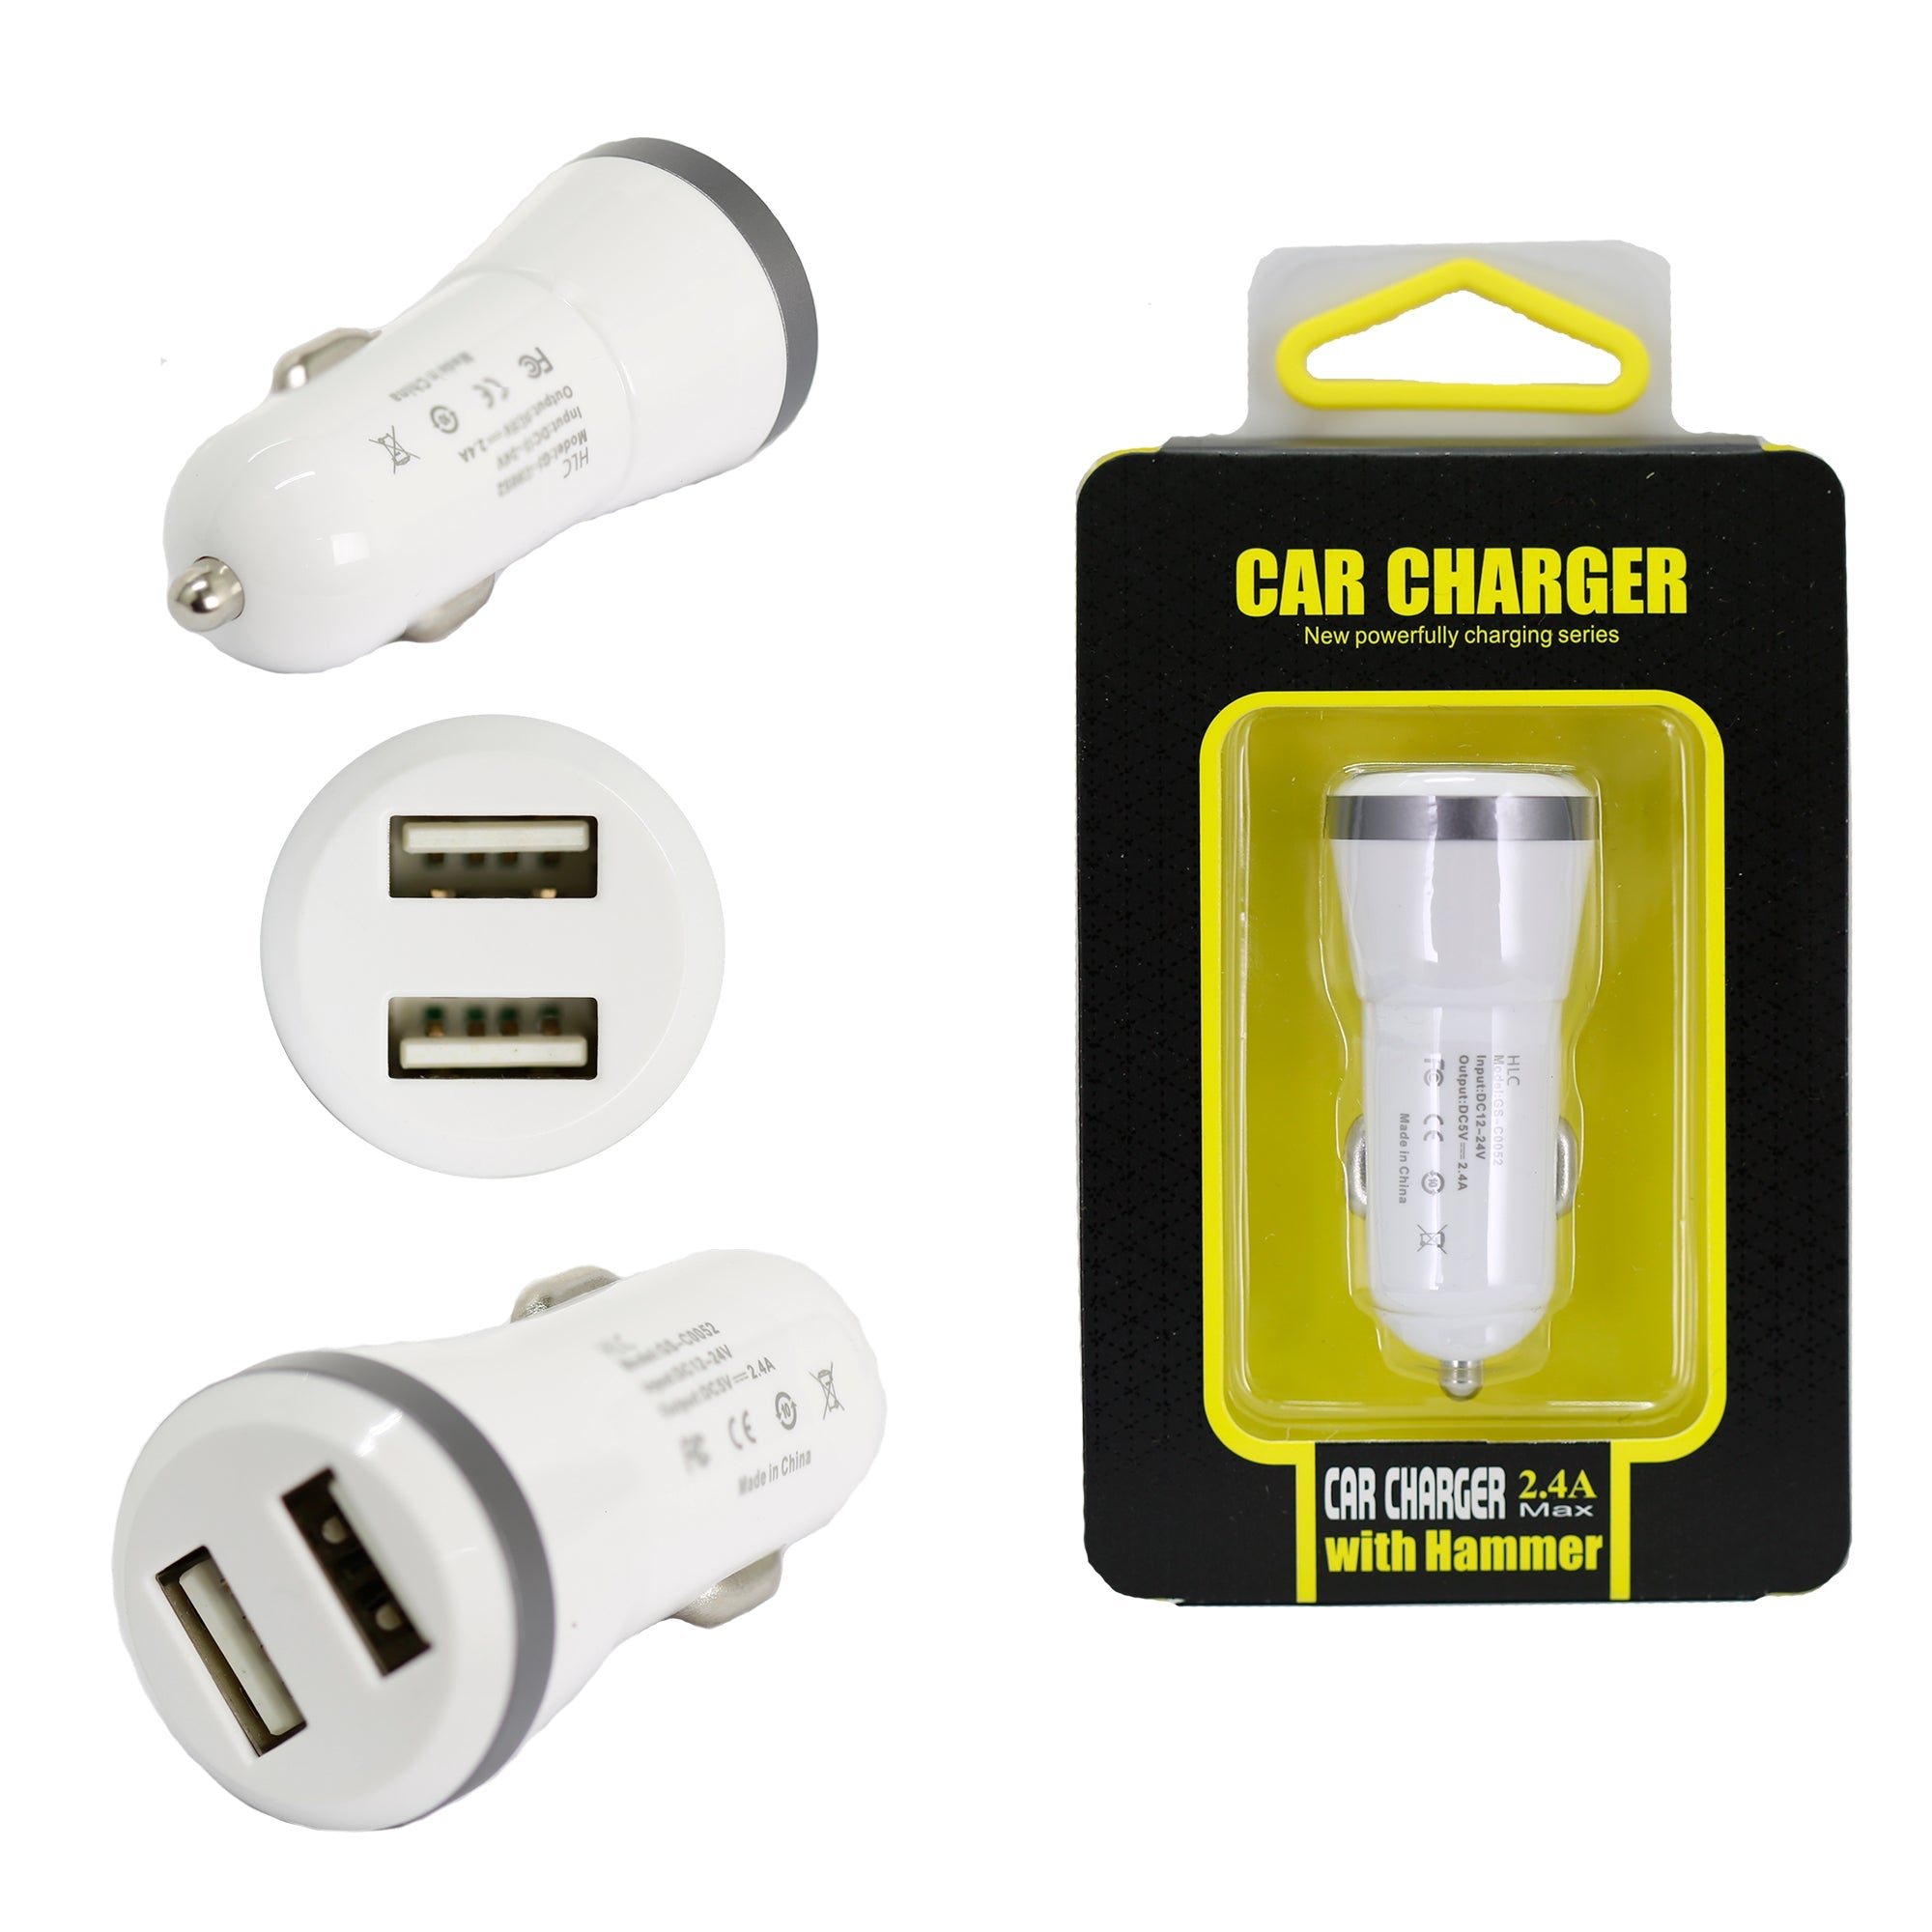 2.4A 2 Port Dual USB Car Adapter for Mobile Phones